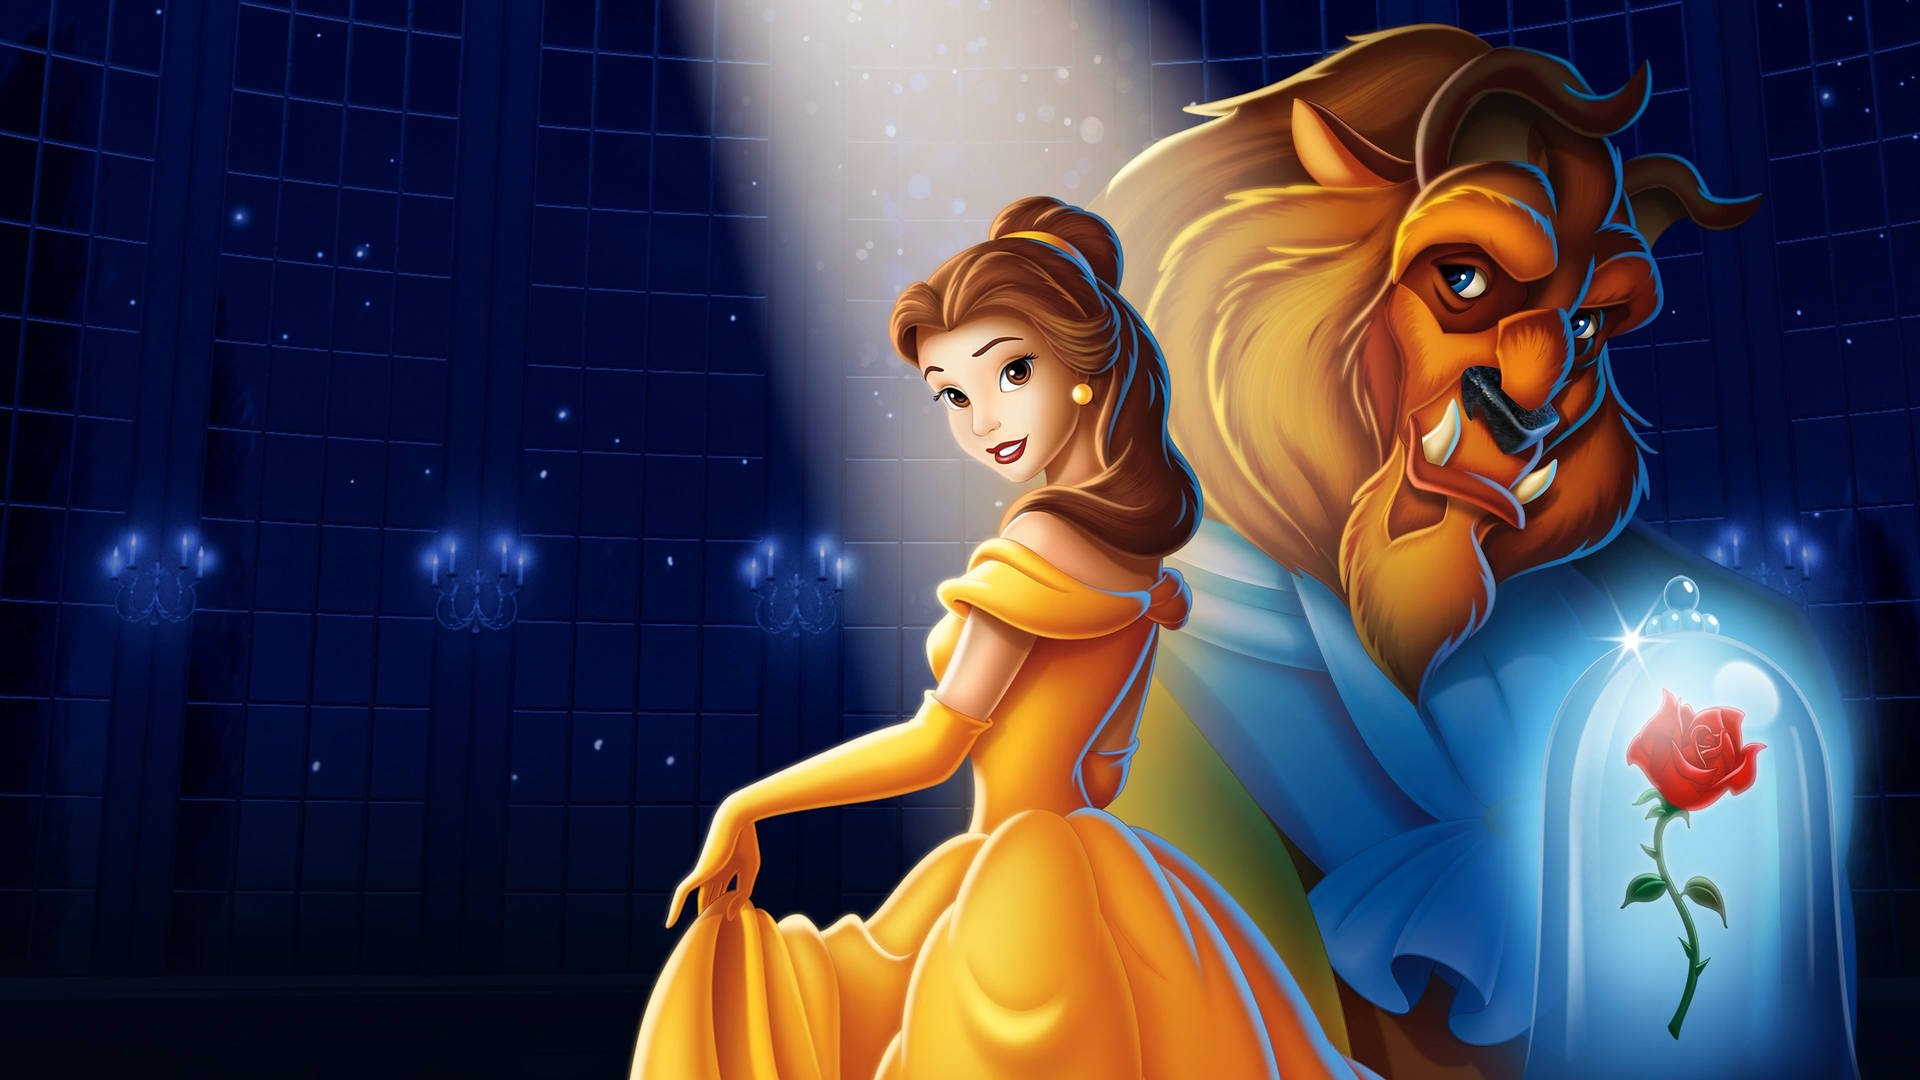 Disney's Belle And The Beast Background